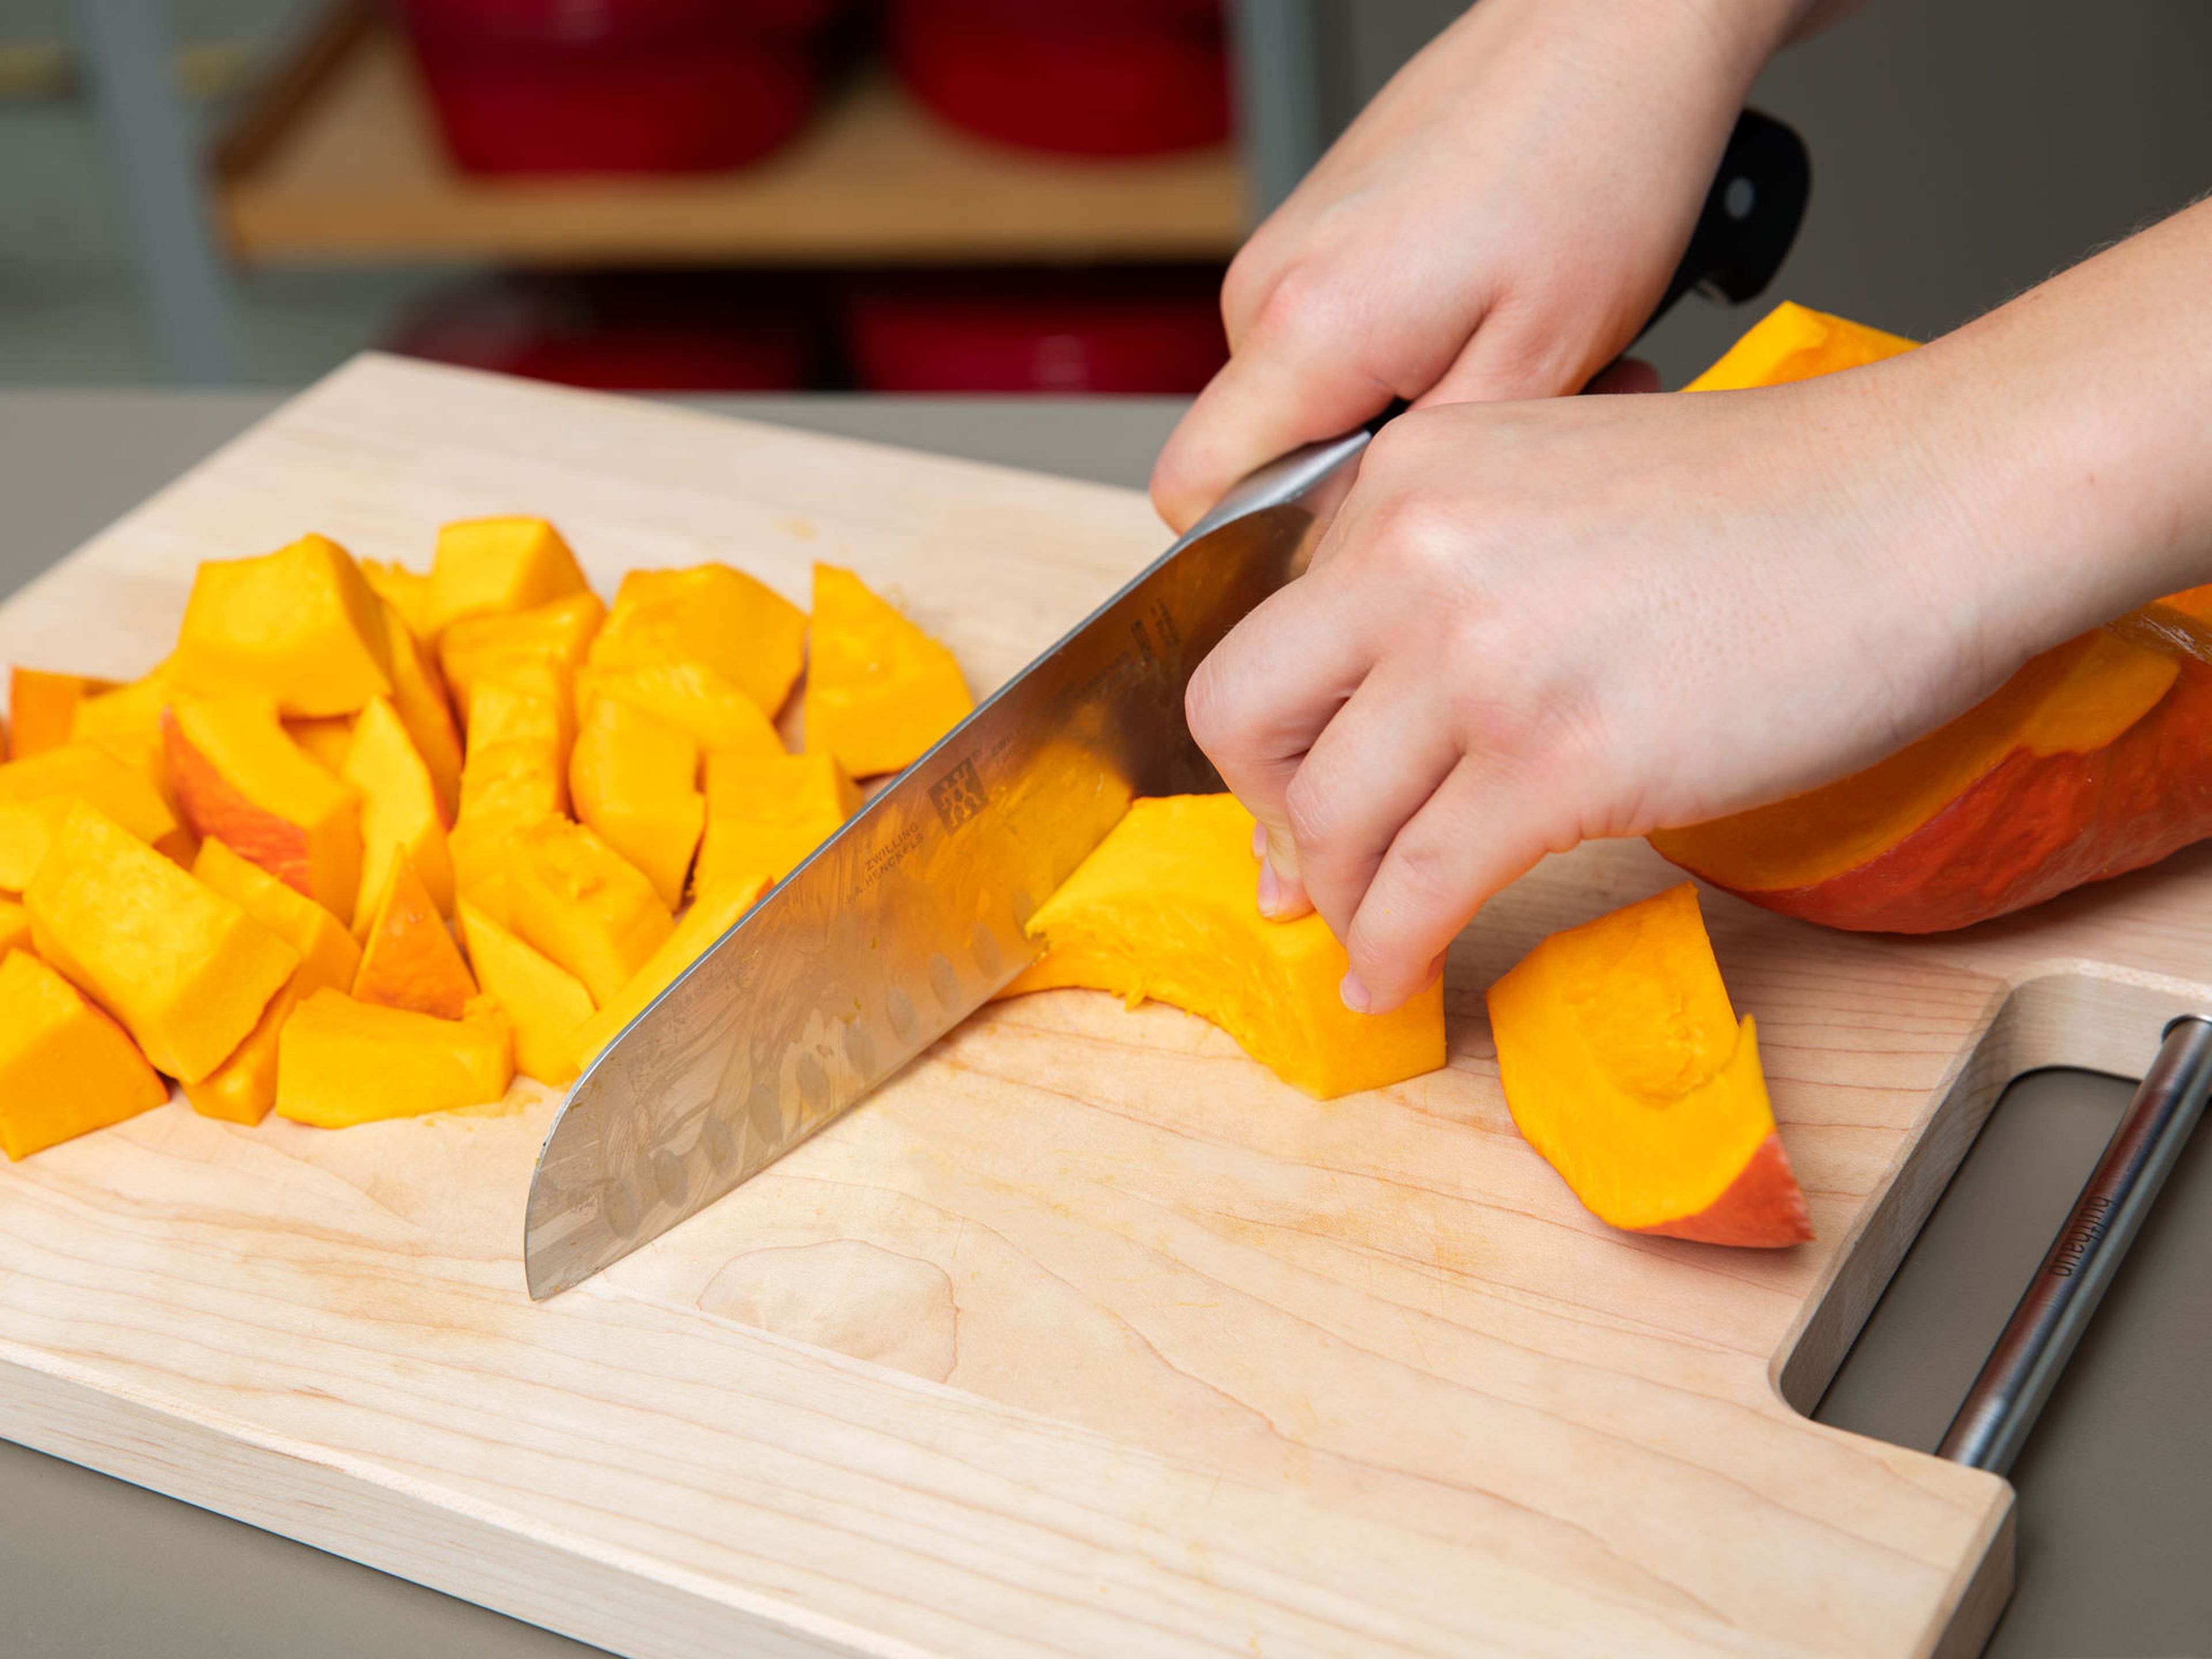 Preheat oven to 200°C/390°F. Halve, deseed, and roughly cut the Hokkaido pumpkin. Transfer to a baking sheet and bake in the oven for approx. 30 min., or until softened.